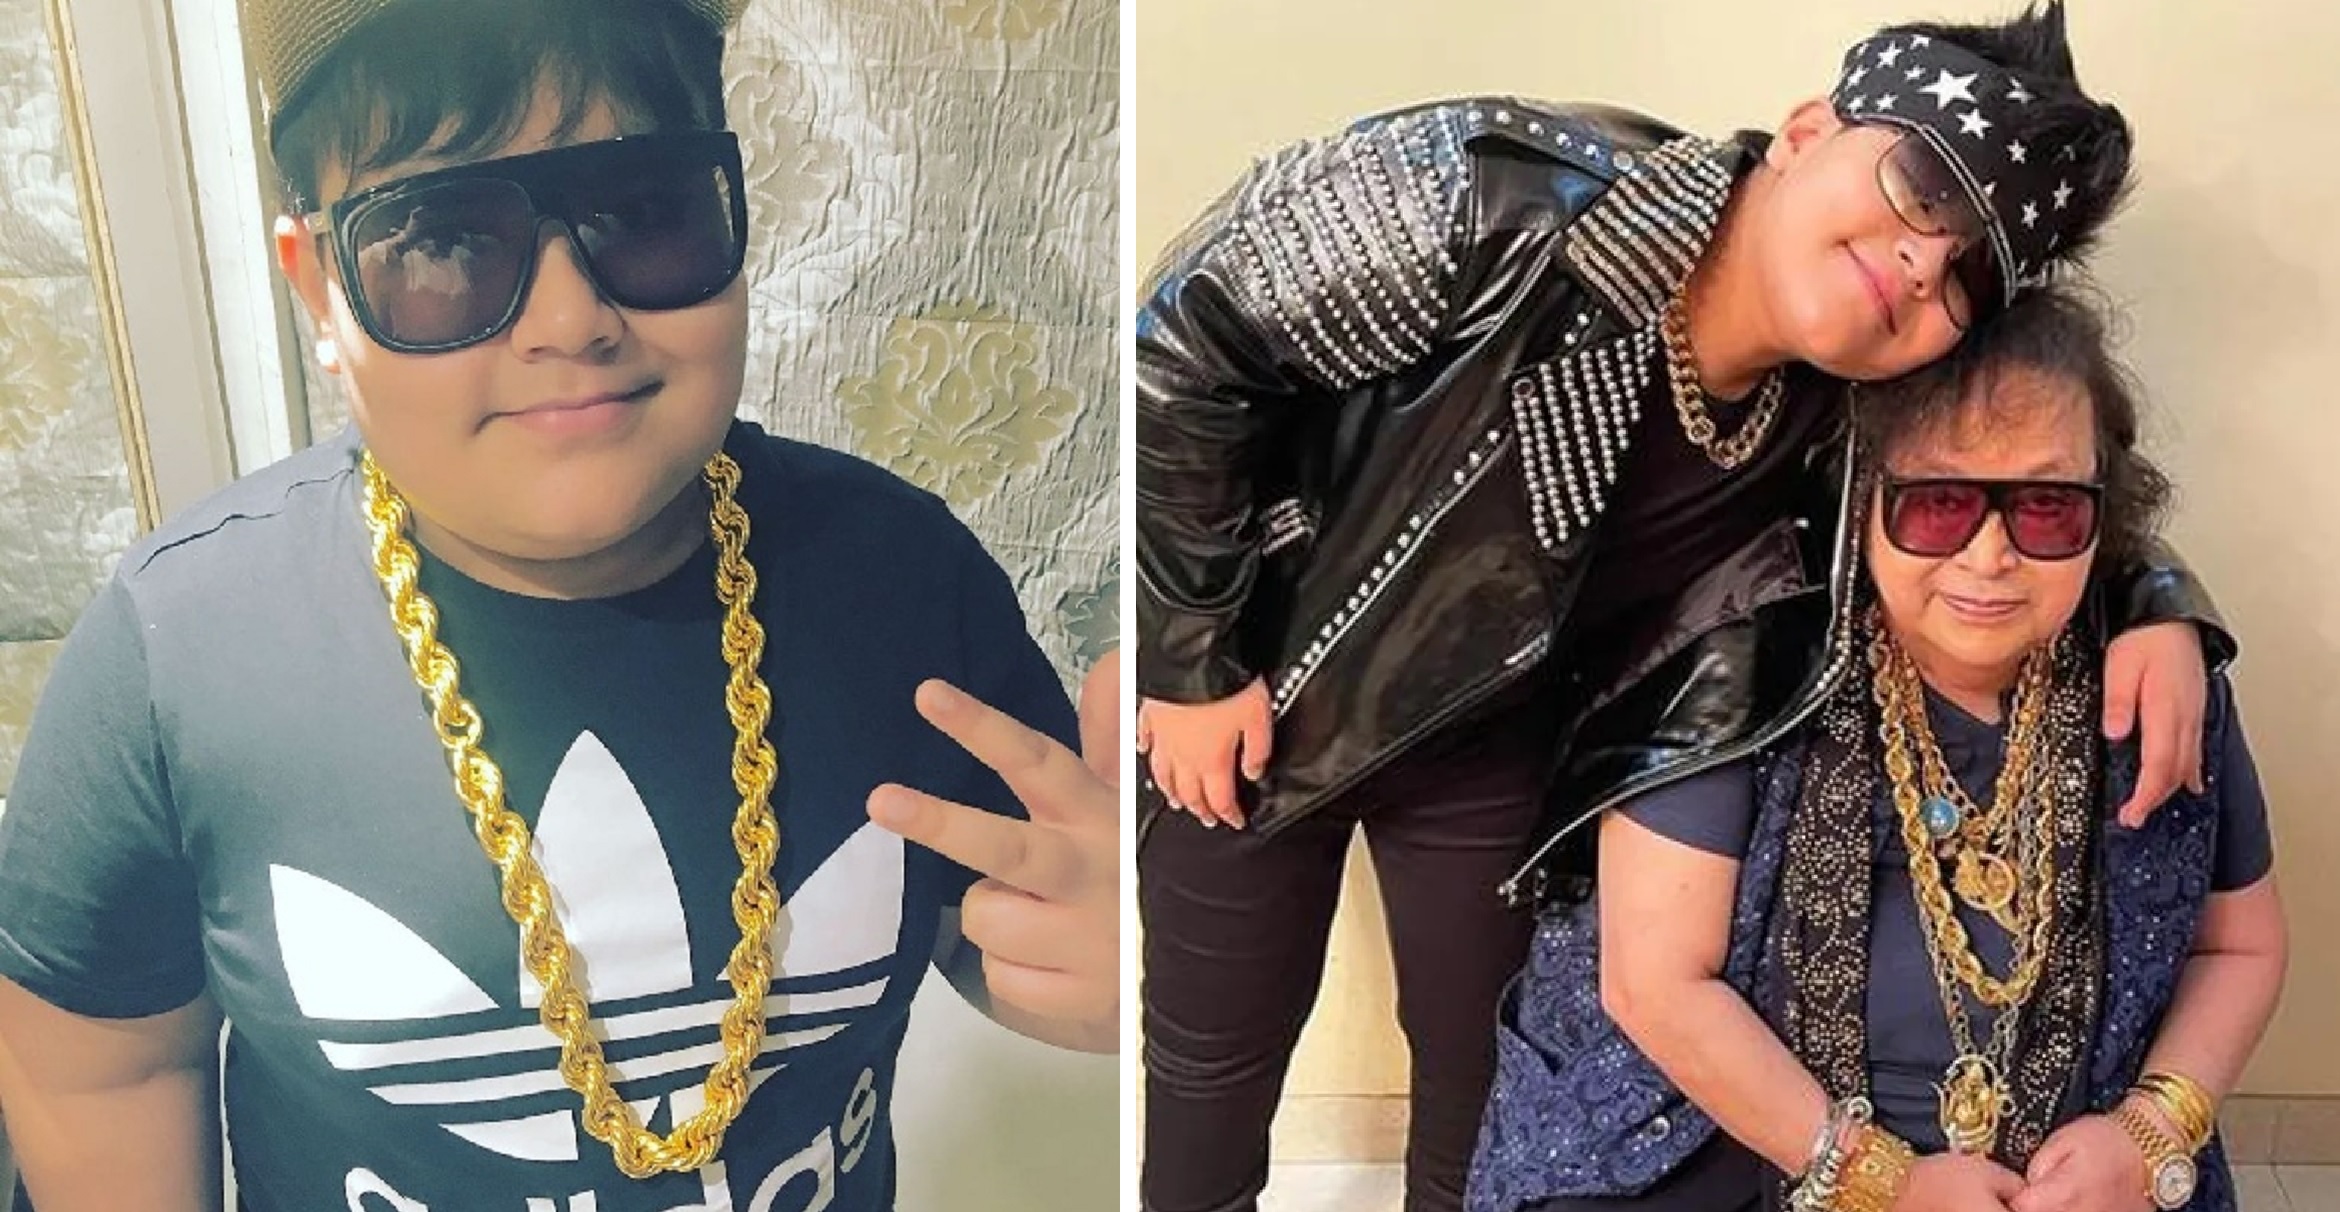 Bappi Lahiri’s 12 Year Old Grandson Rego B Says He Will Take The Icon’s Musical Legacy Forward